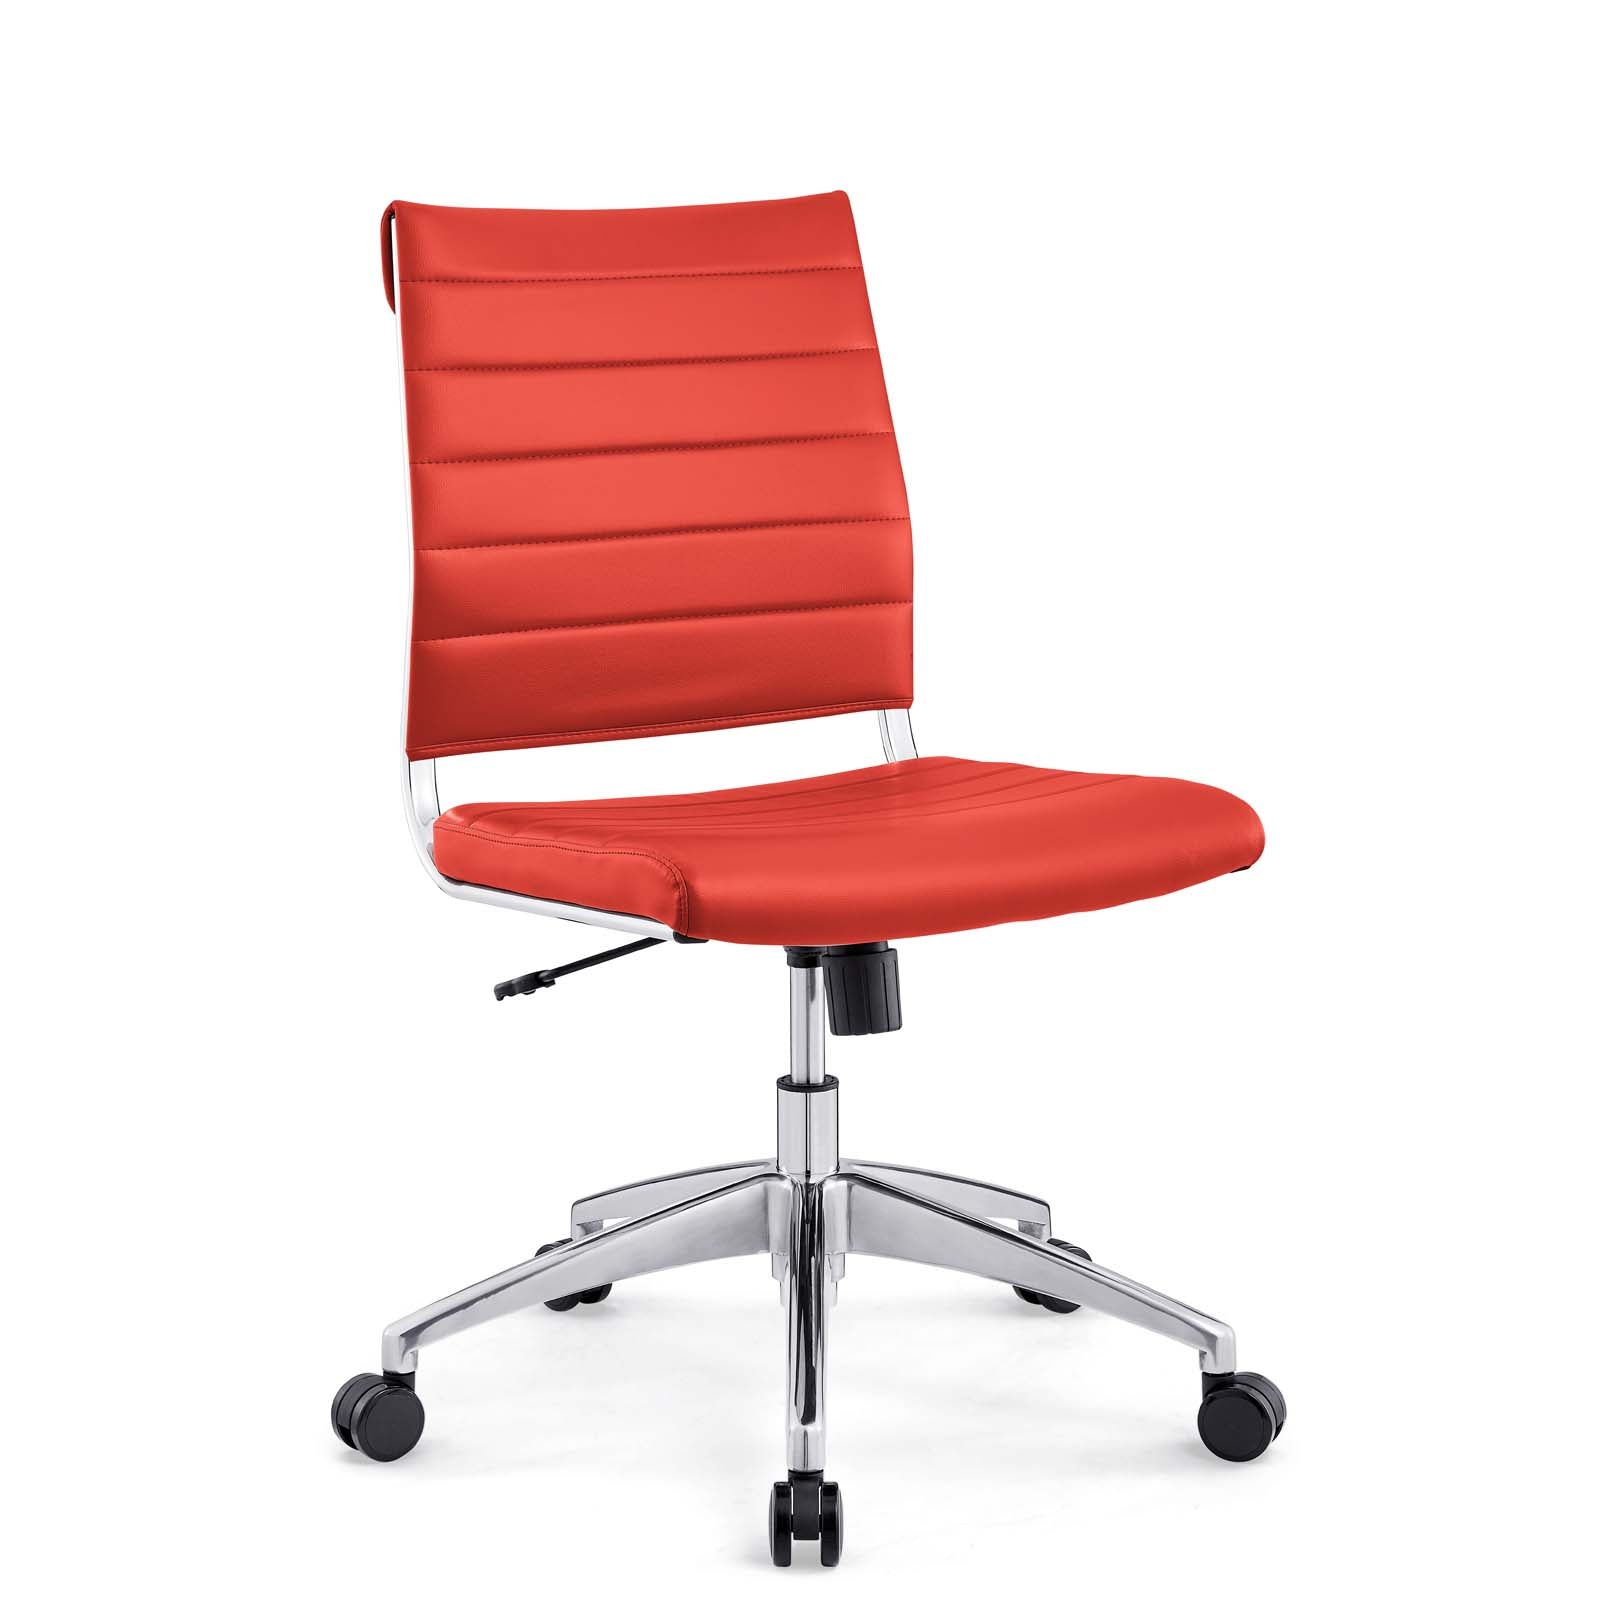 Jive Armless Mid Back Office Chair (Orange) at BUILDMyplace